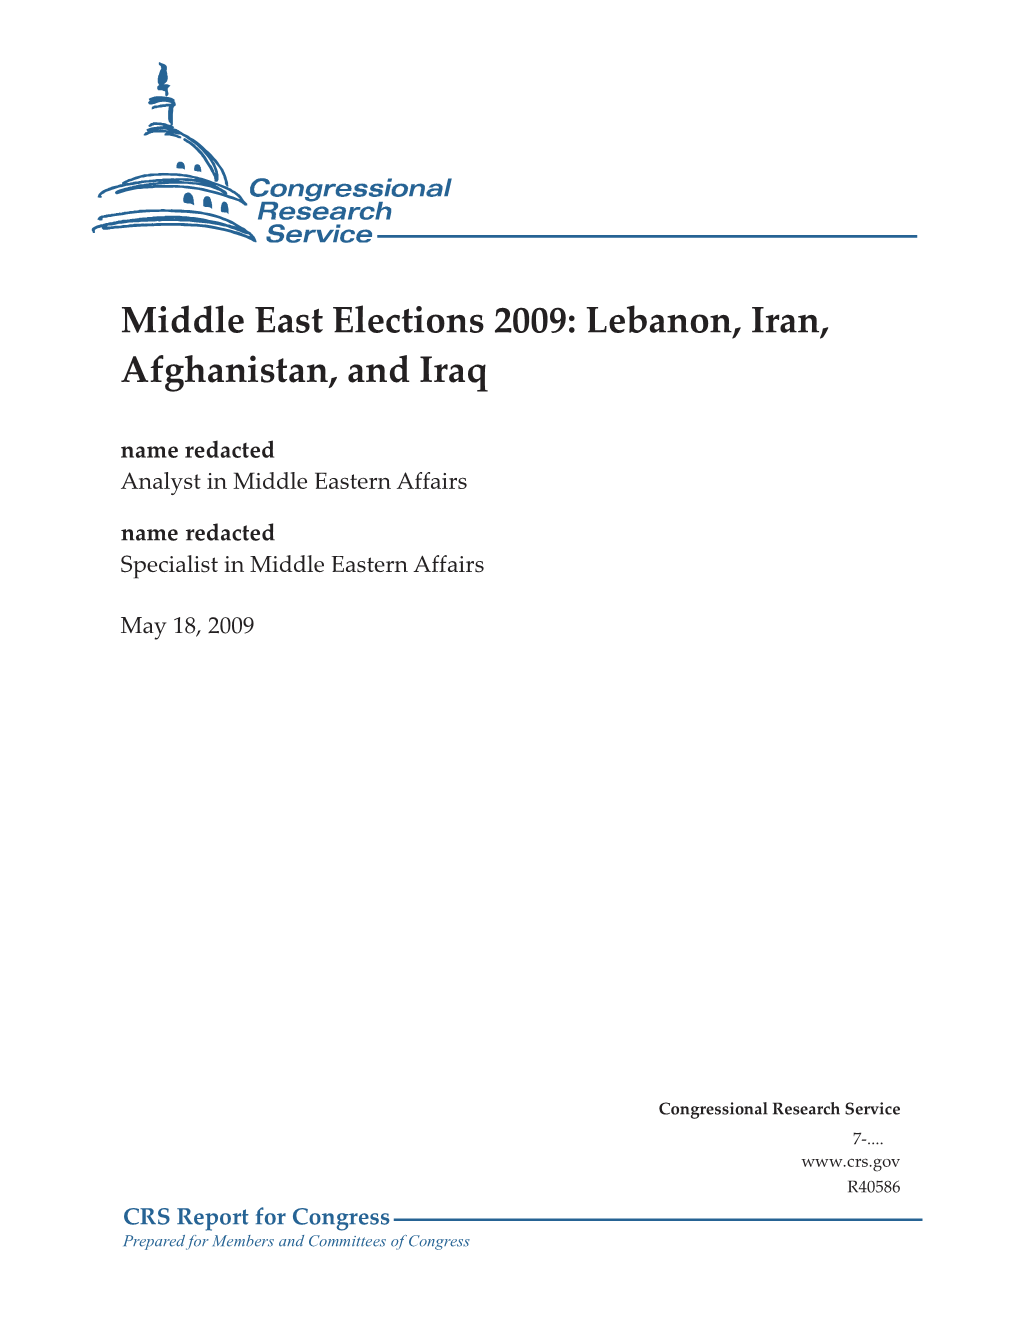 Middle East Elections 2009: Lebanon, Iran, Afghanistan, and Iraq Name Redacted Analyst in Middle Eastern Affairs Name Redacted Specialist in Middle Eastern Affairs